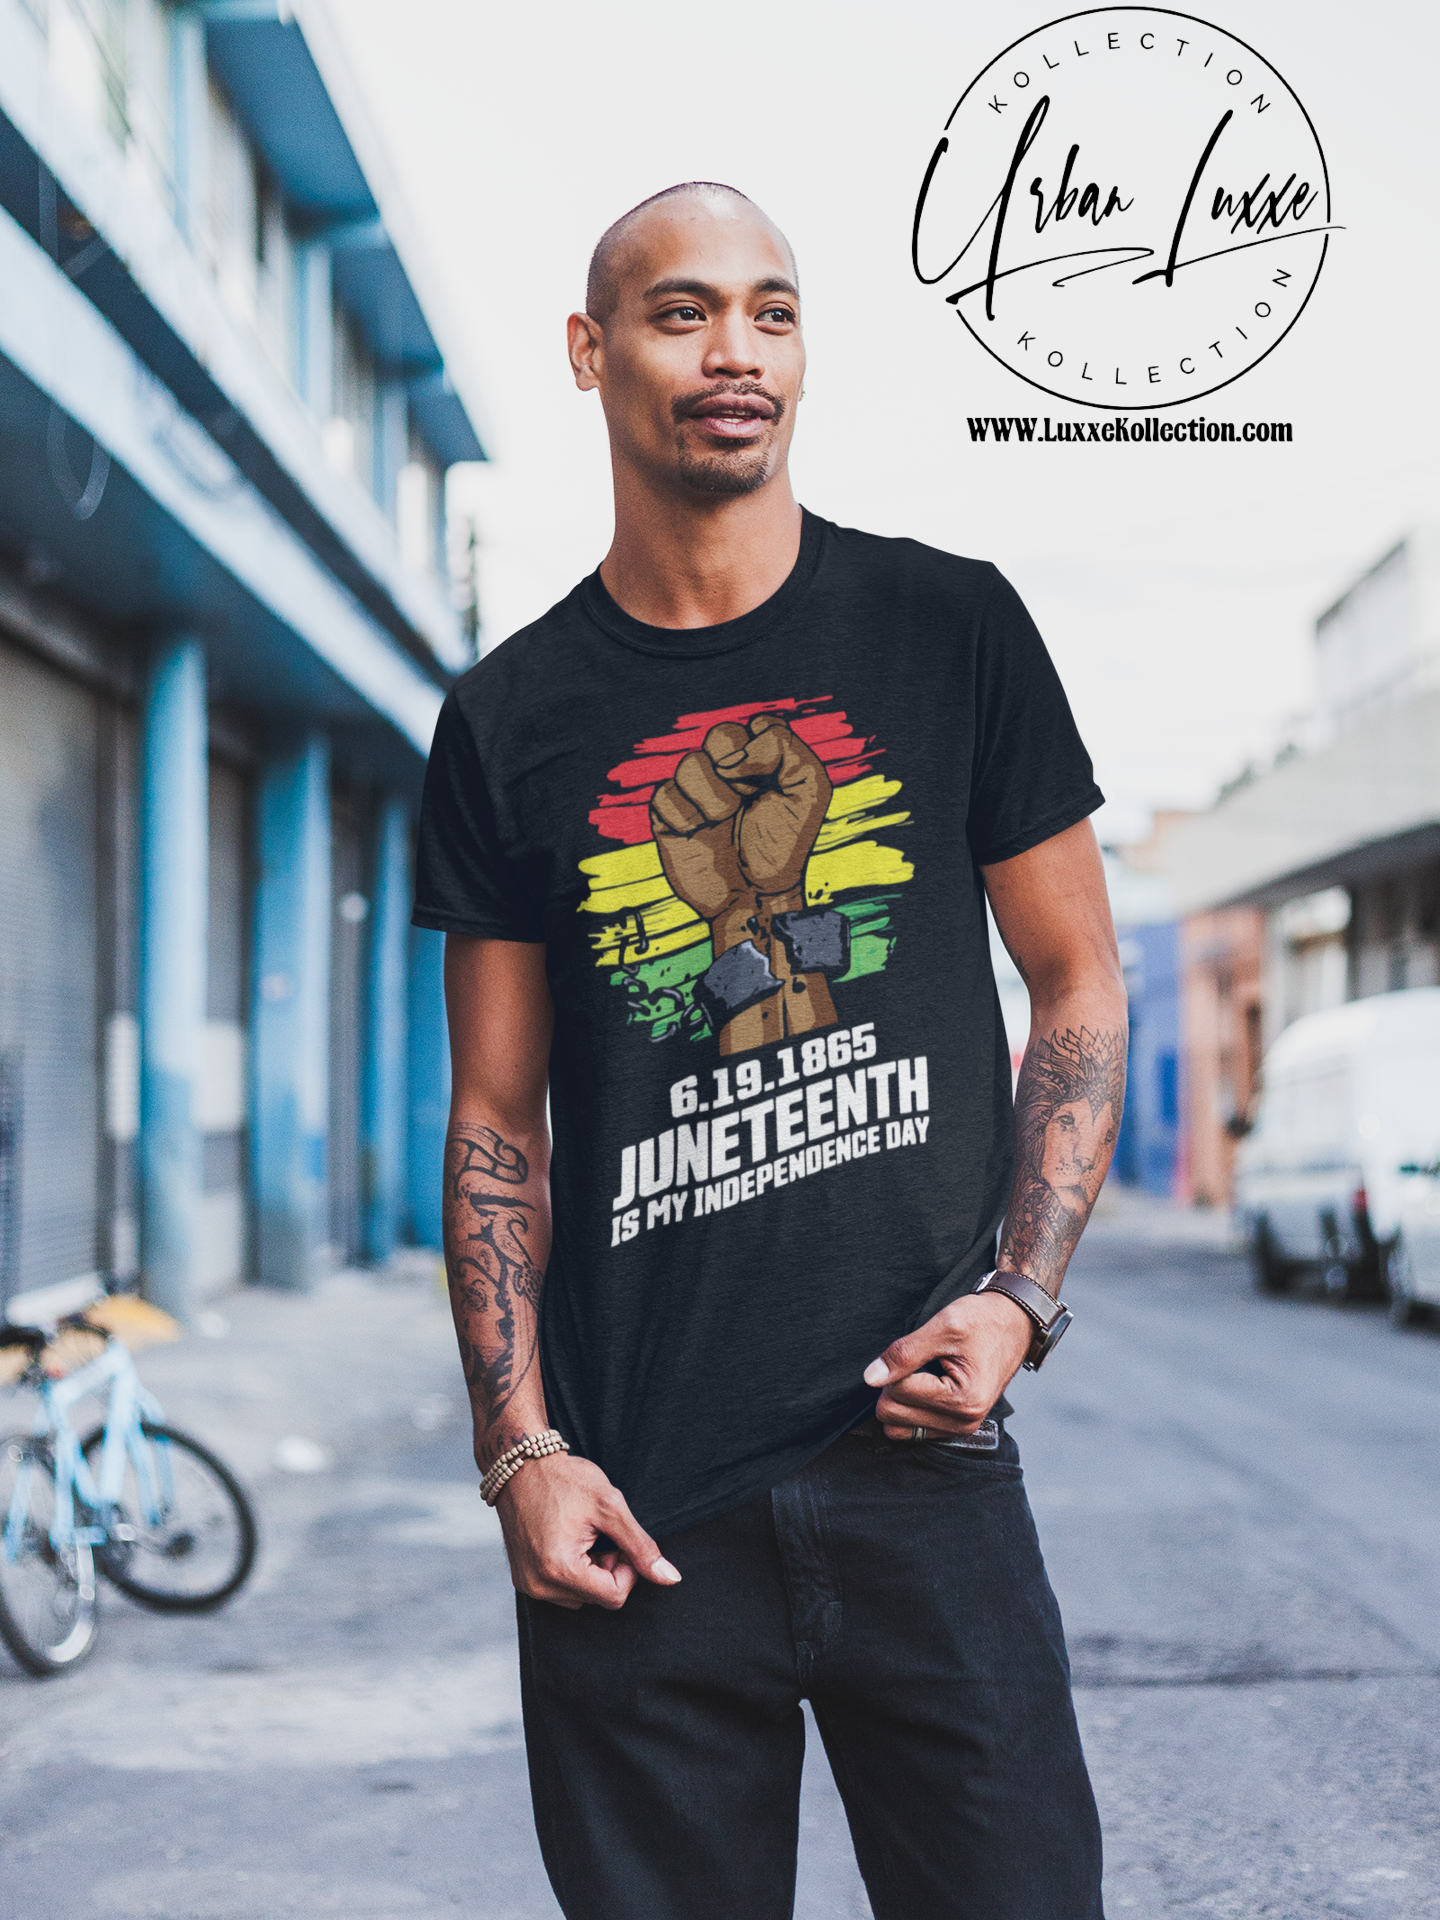 Juneteenth Is My Independence Day T-shirt